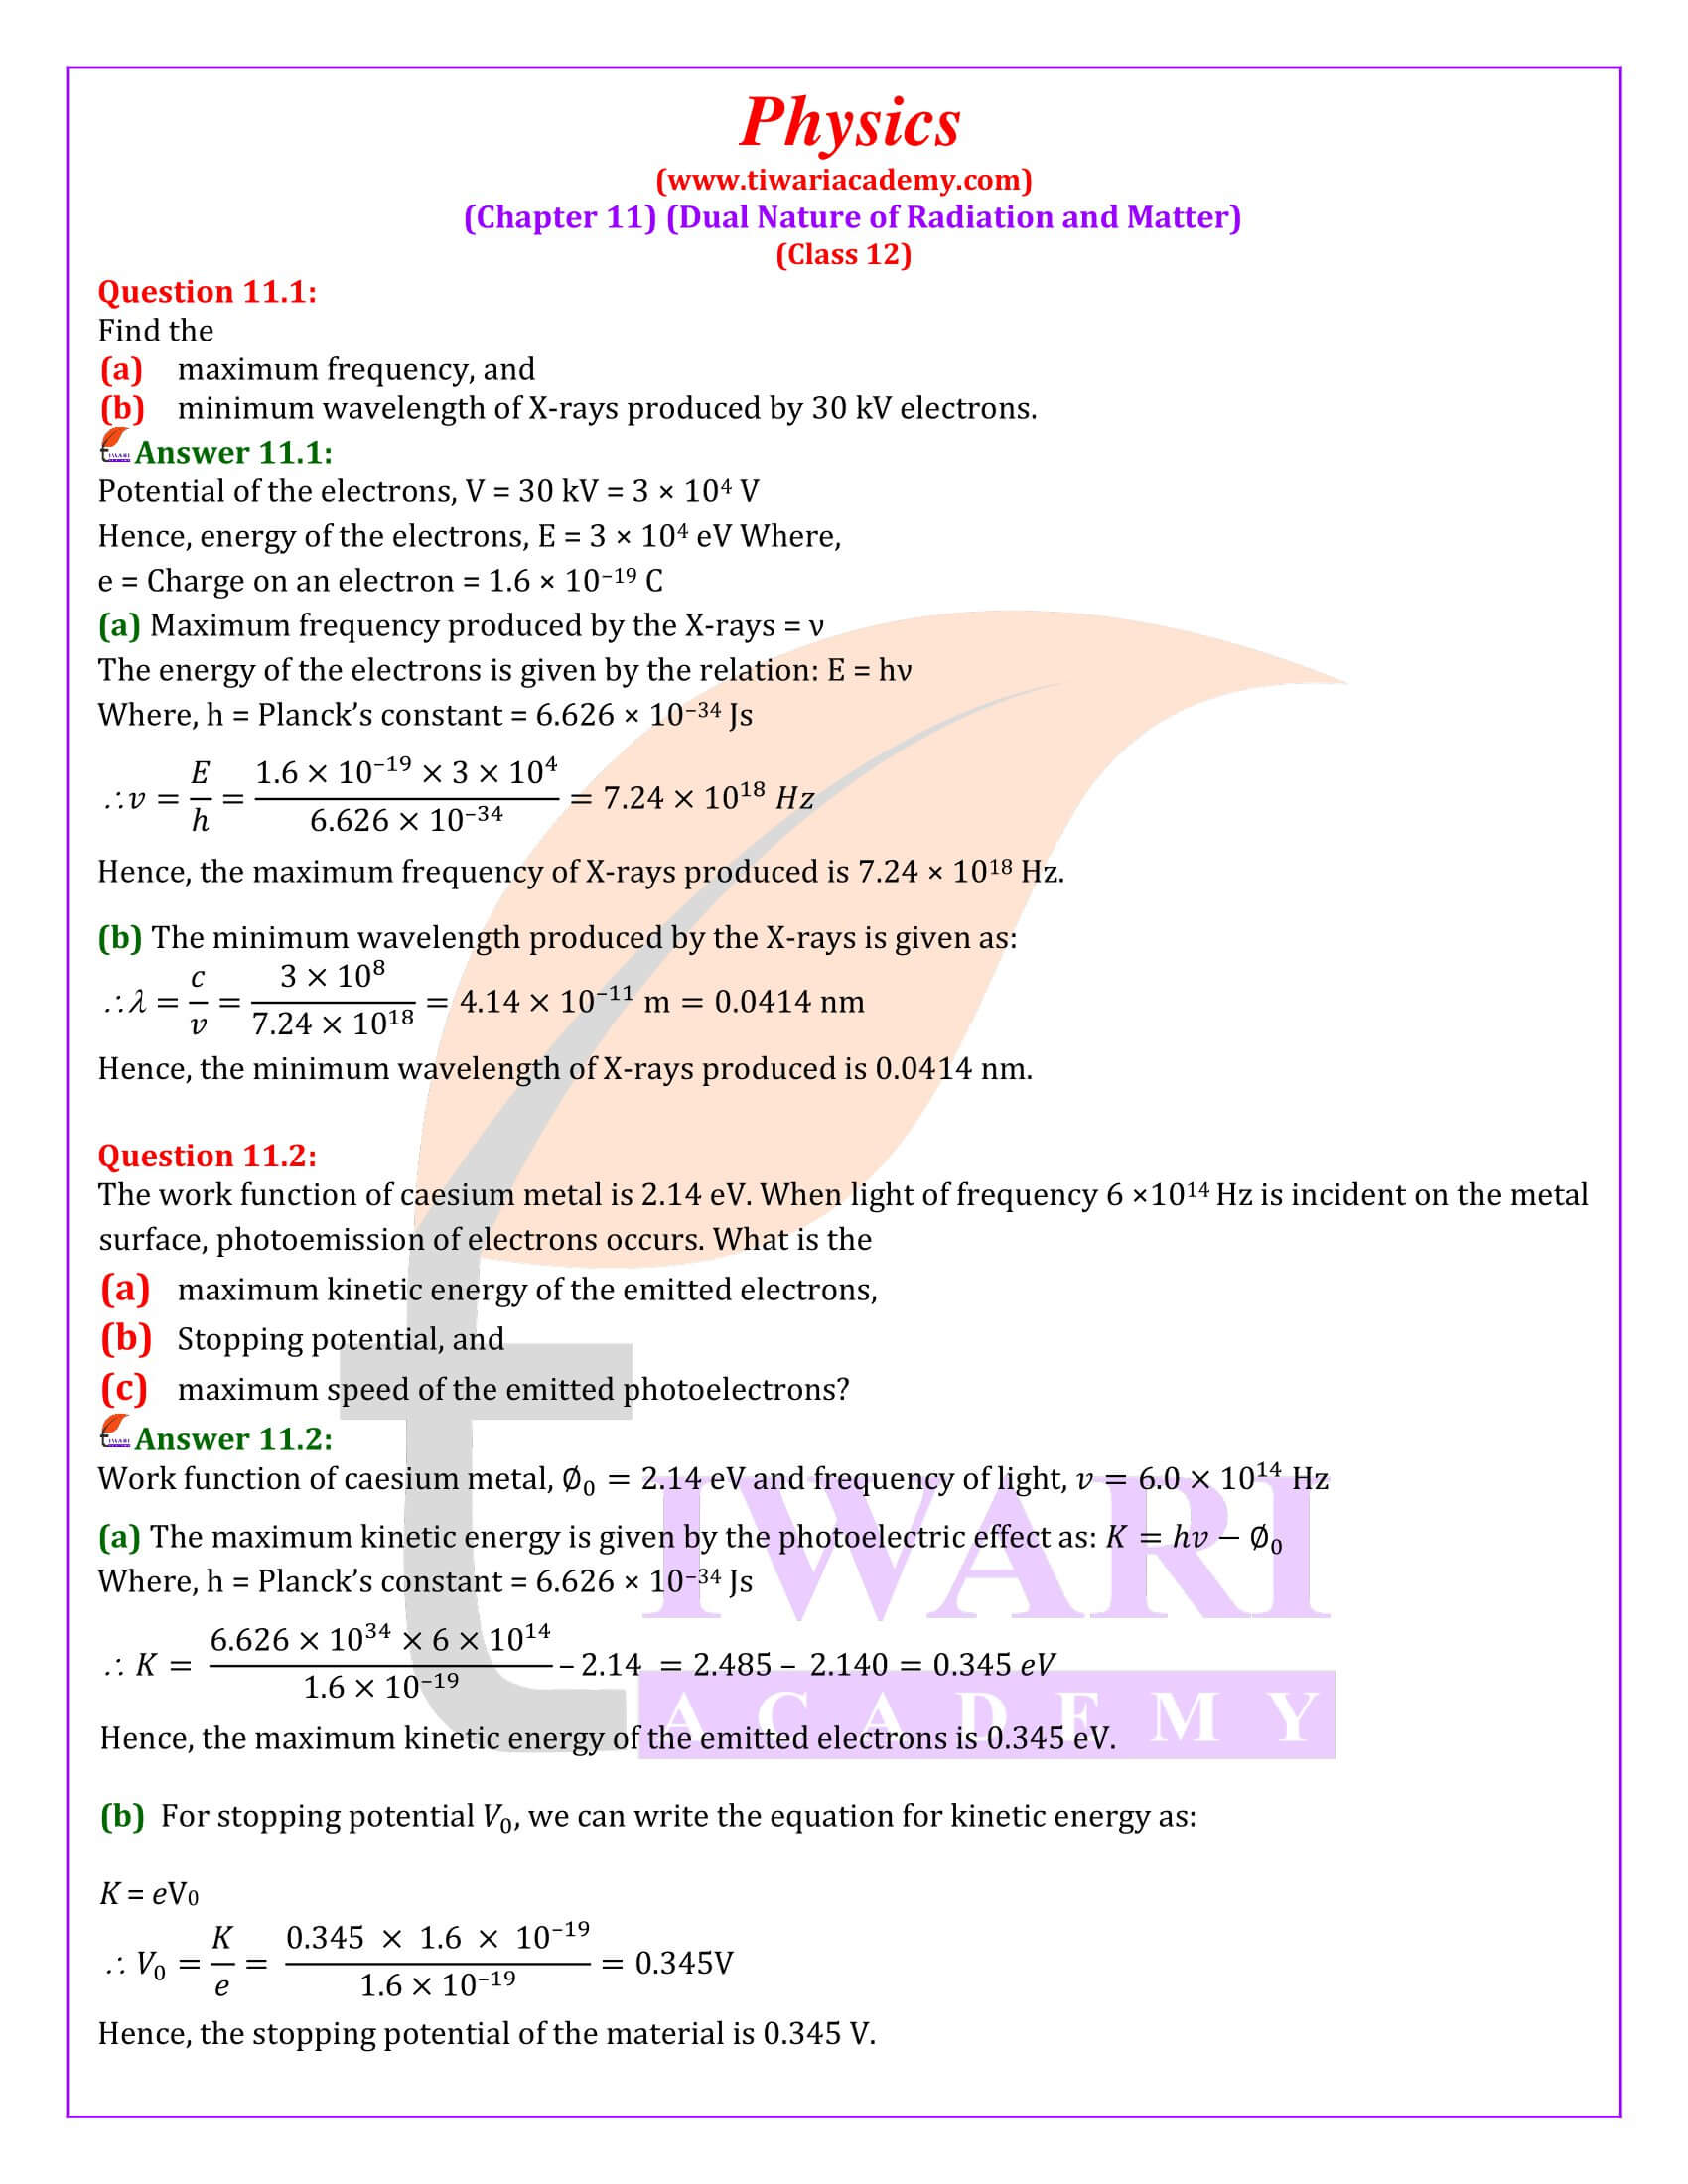 NCERT Solutions for Class 12 Physics Chapter 11 Dual Nature of Radiation and Matter in English Medium